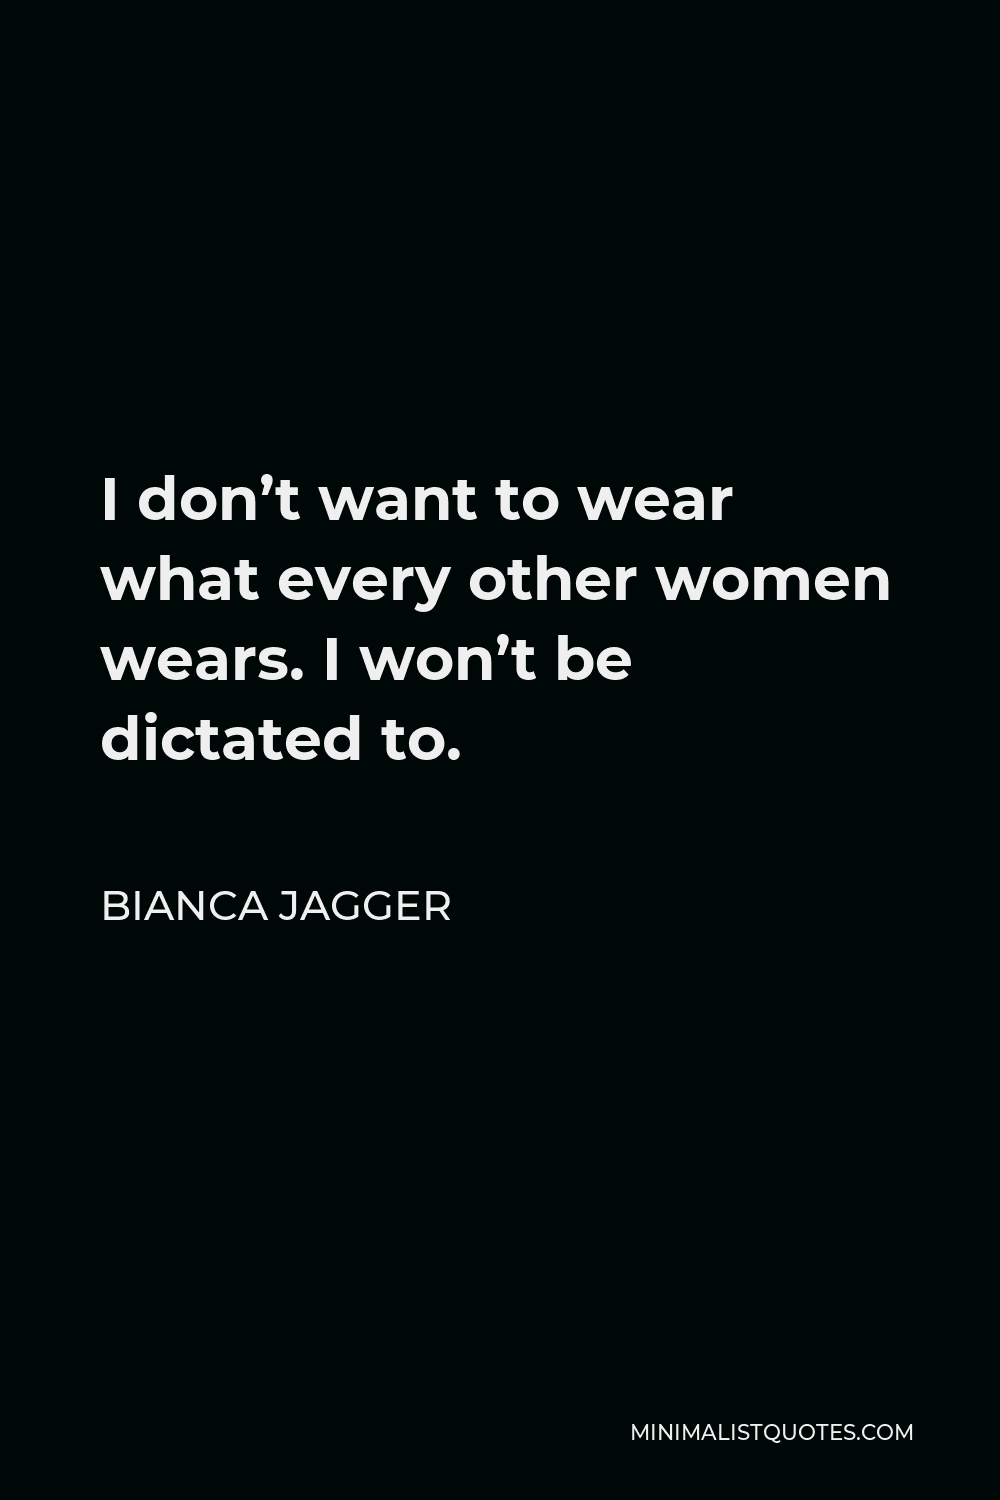 Bianca Jagger Quote - I don’t want to wear what every other women wears. I won’t be dictated to.